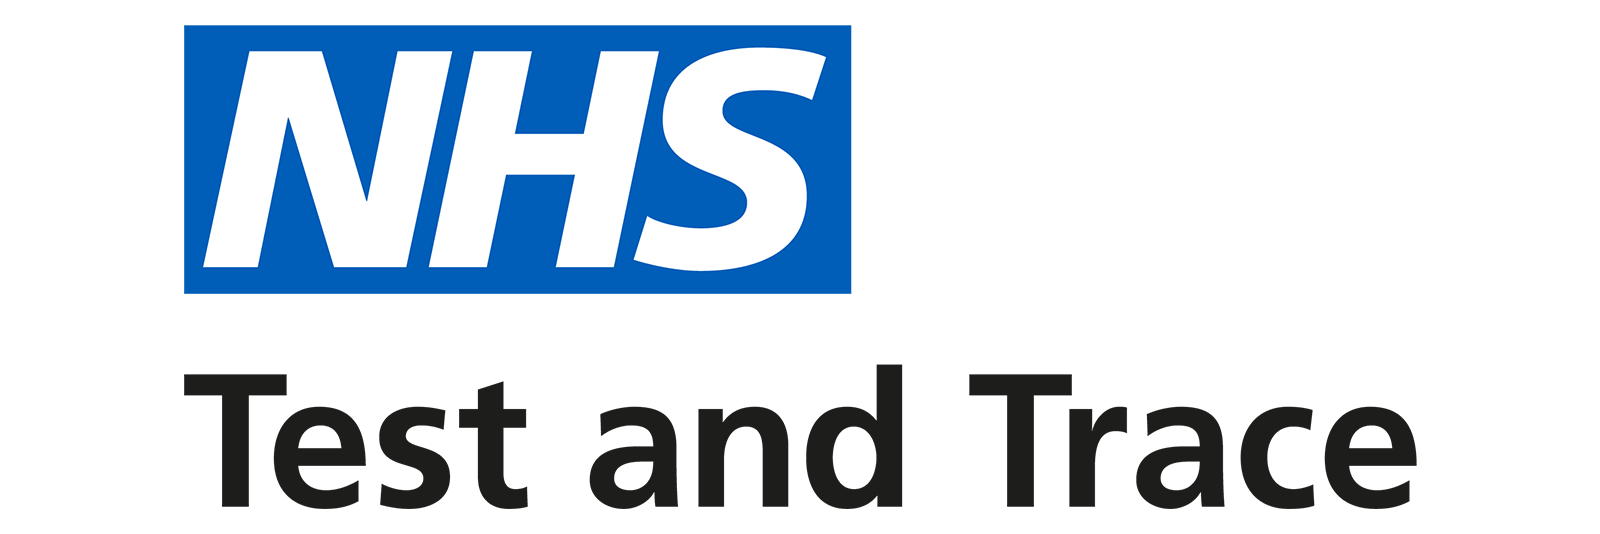 NHS test and trace logo